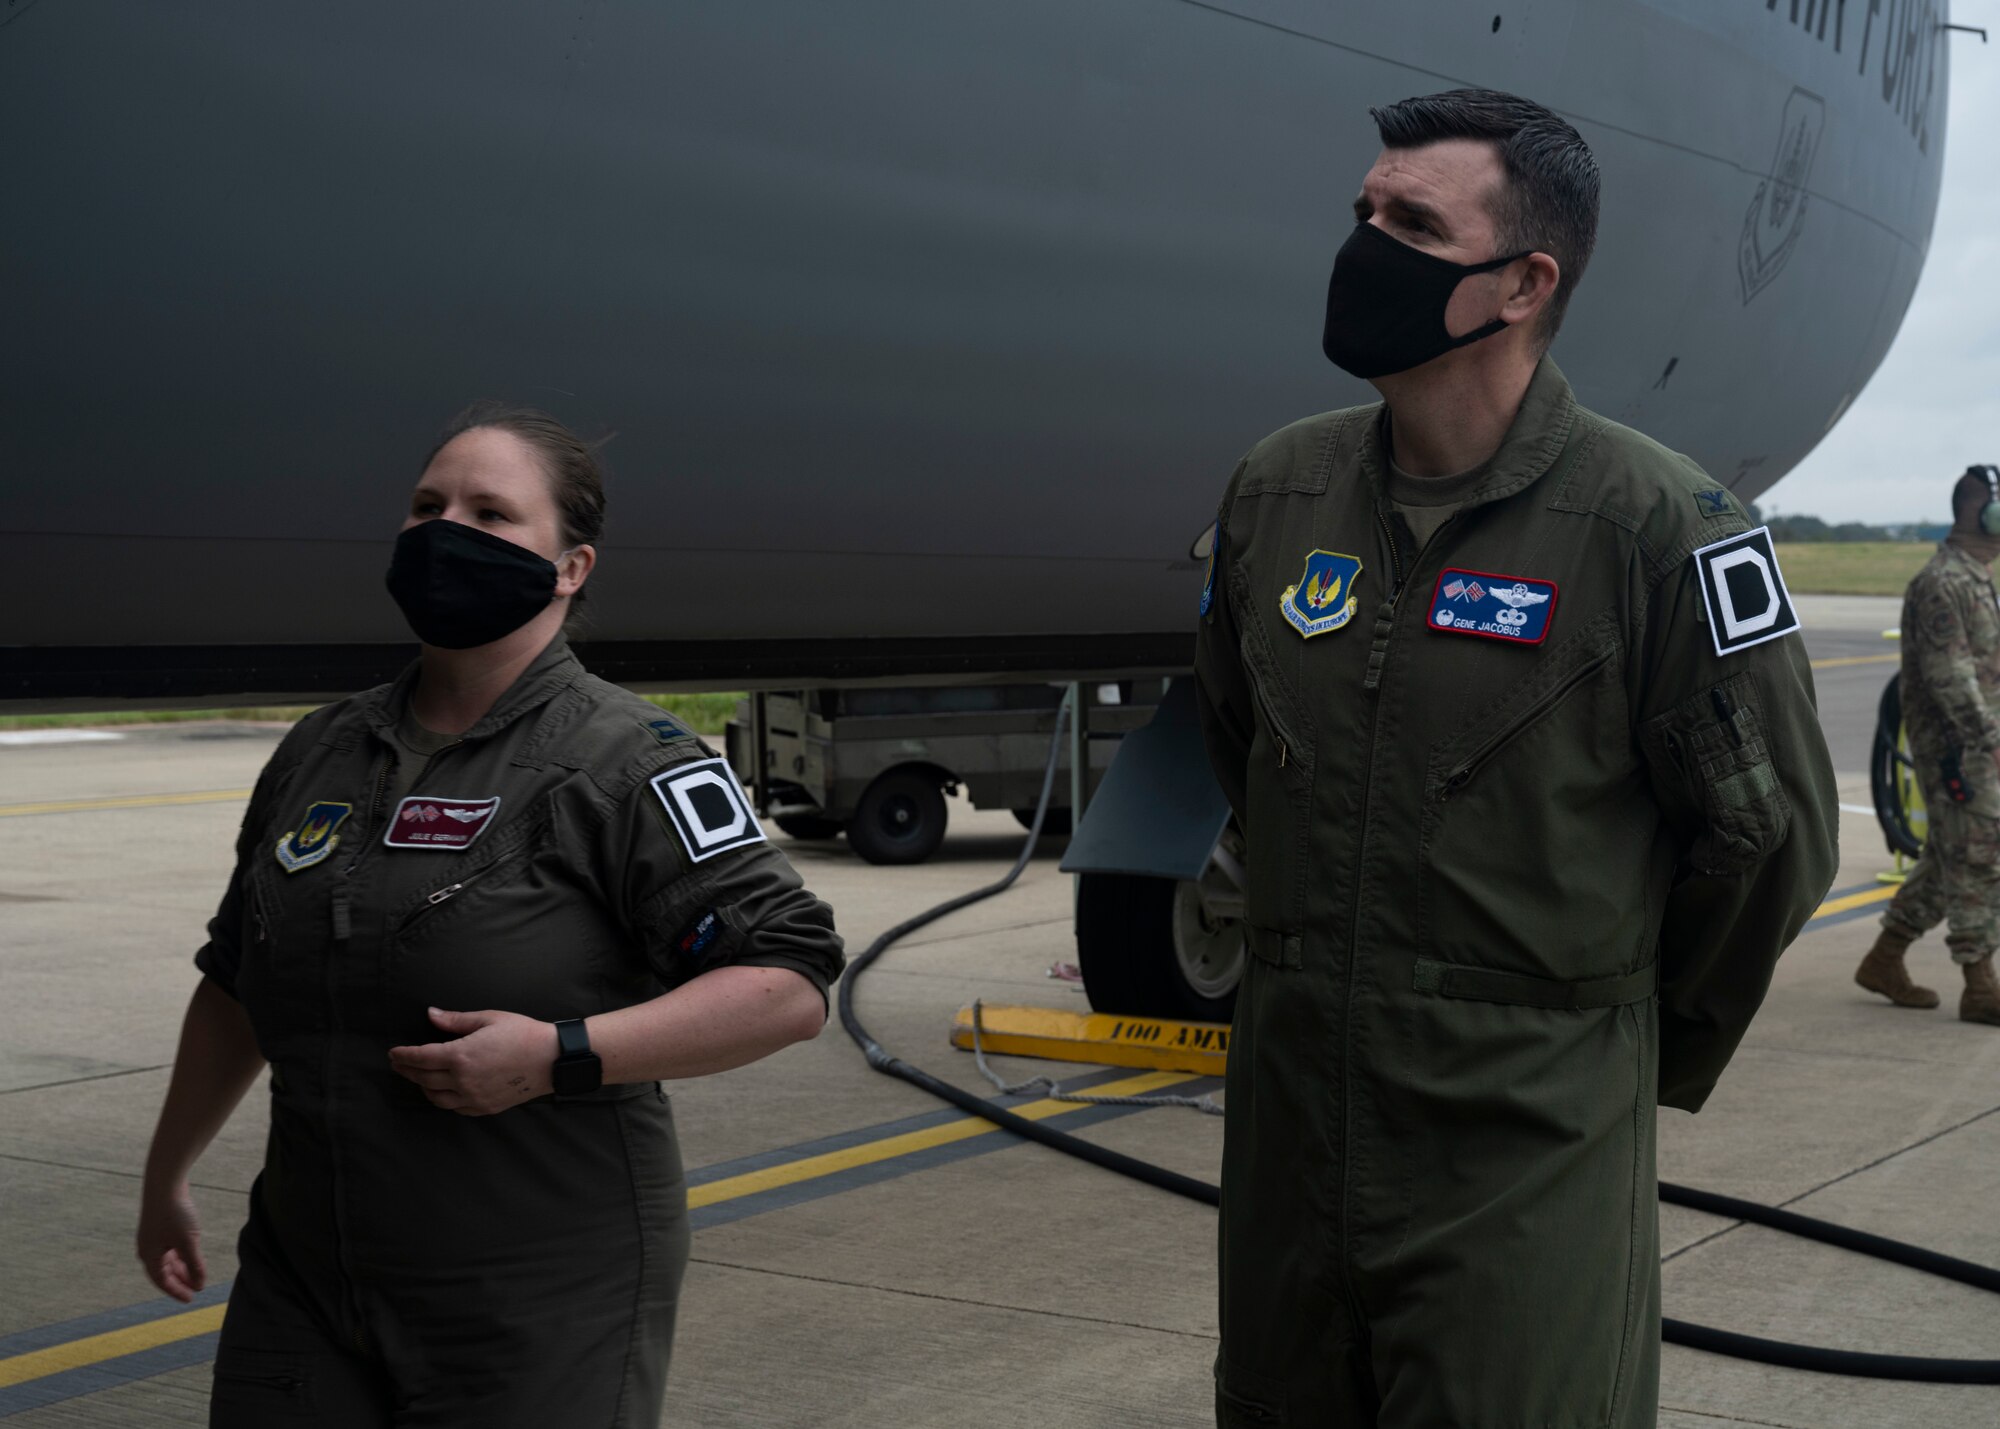 U.S. Air Force Capt. Julianne Germain, 351st Air Refueling Squadron KC-135 Stratotanker pilot, performs a pre-flight inspection with Col. Gene Jacobus, 100th Air Refueling Wing commander at Royal Air Force Mildenhall, England, Sept. 1, 2021. Pre-flight inspections are performed to ensure mission, operational readiness and safety of the crew in order to conduct air refueling and combat support operations throughout the European and African area of responsibility. (U.S. Air Force photo by Airman Alvaro Villagomez)